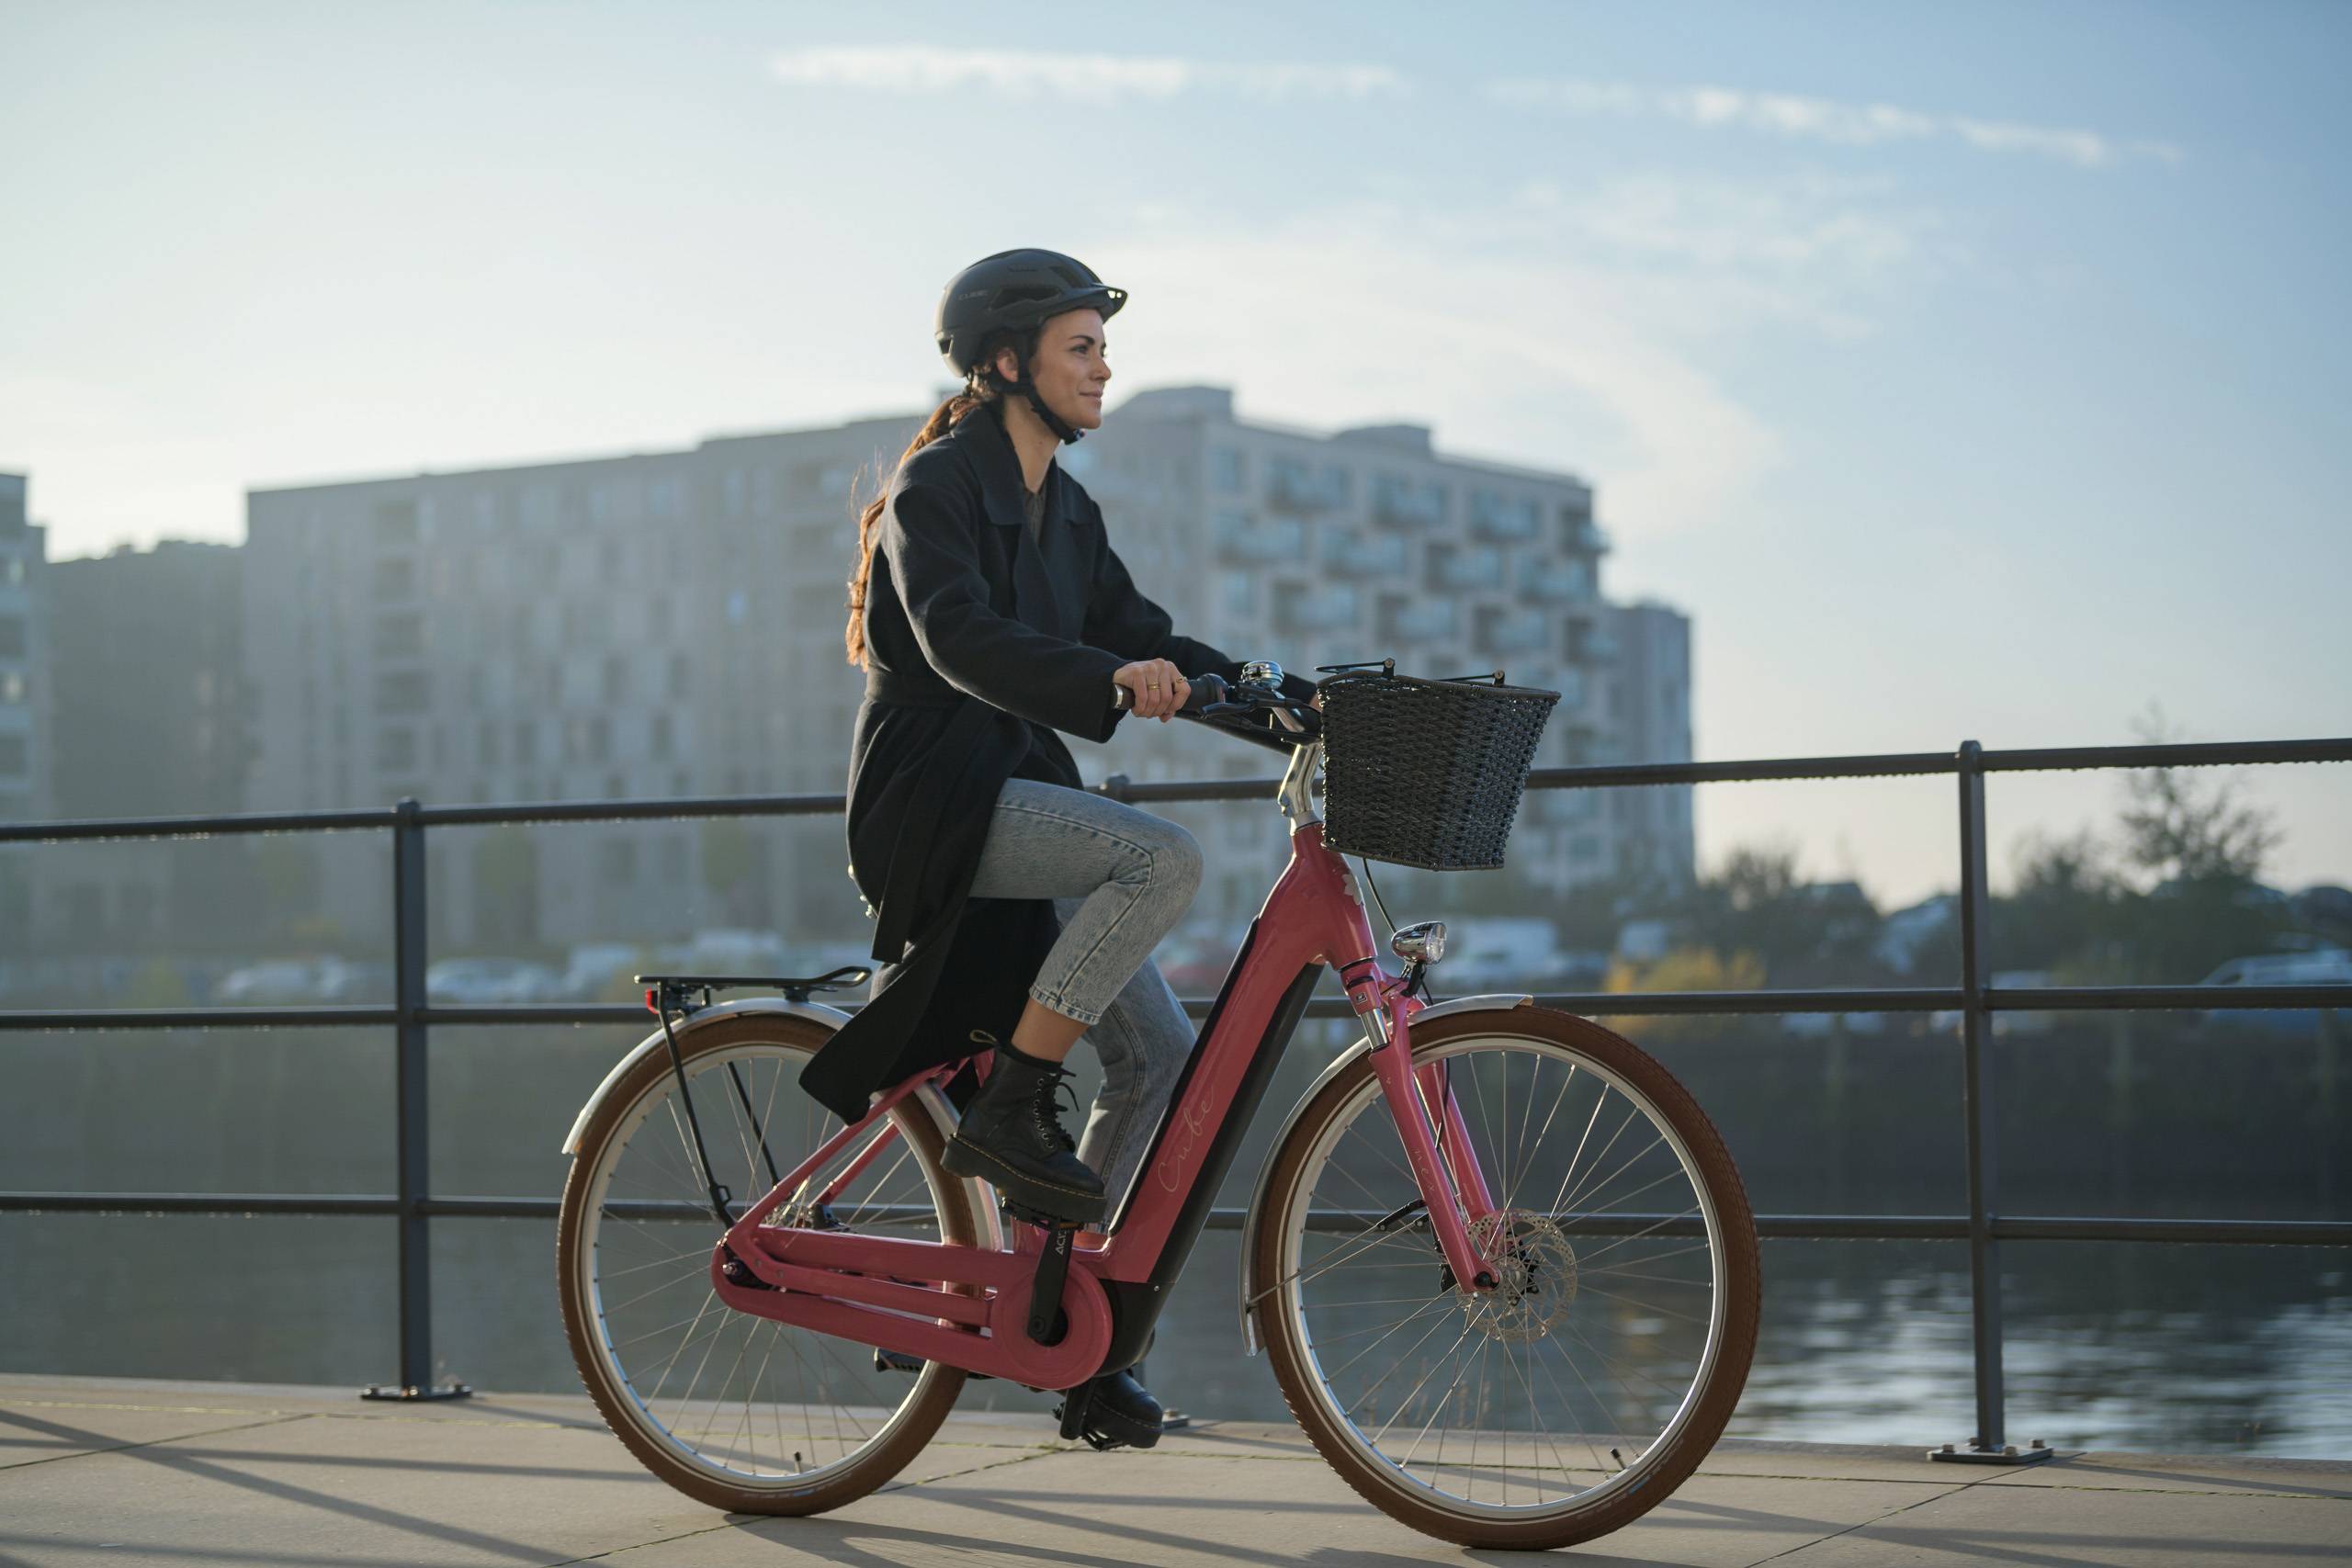 woman with helmet on cube bike in urban surrounding on bridge in front of river